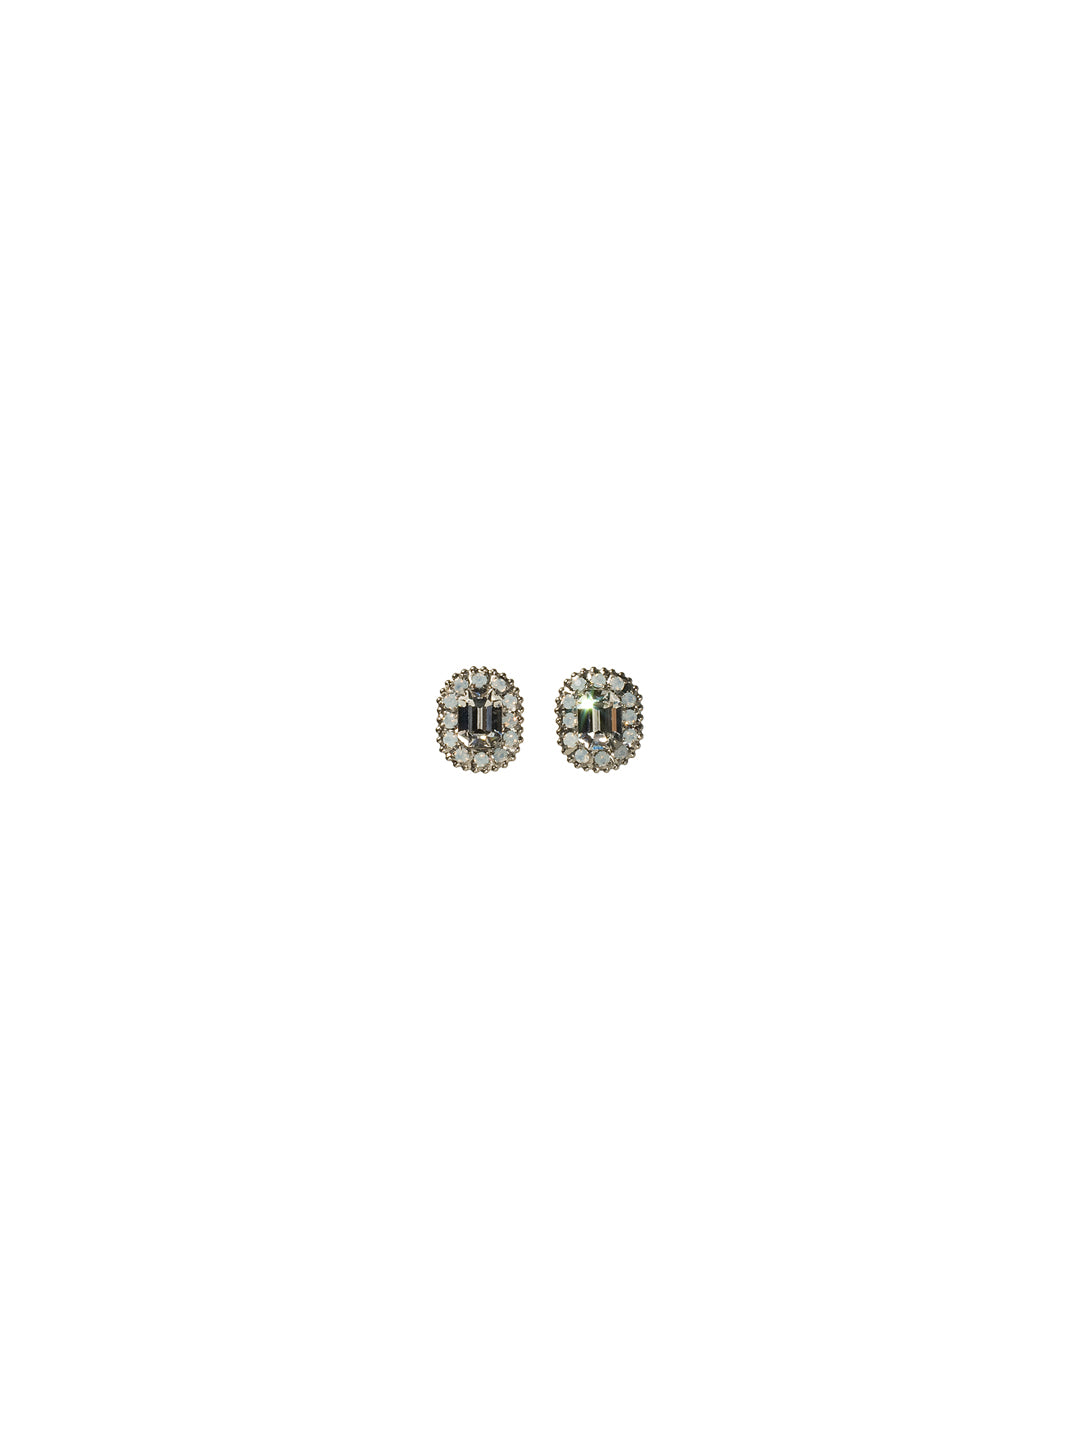 Petite Crystal Stud Earring - EBZ40ASWBR - <p>A classic Sorrelli earring with a rhinestone edging. From Sorrelli's White Bridal collection in our Antique Silver-tone finish.</p>